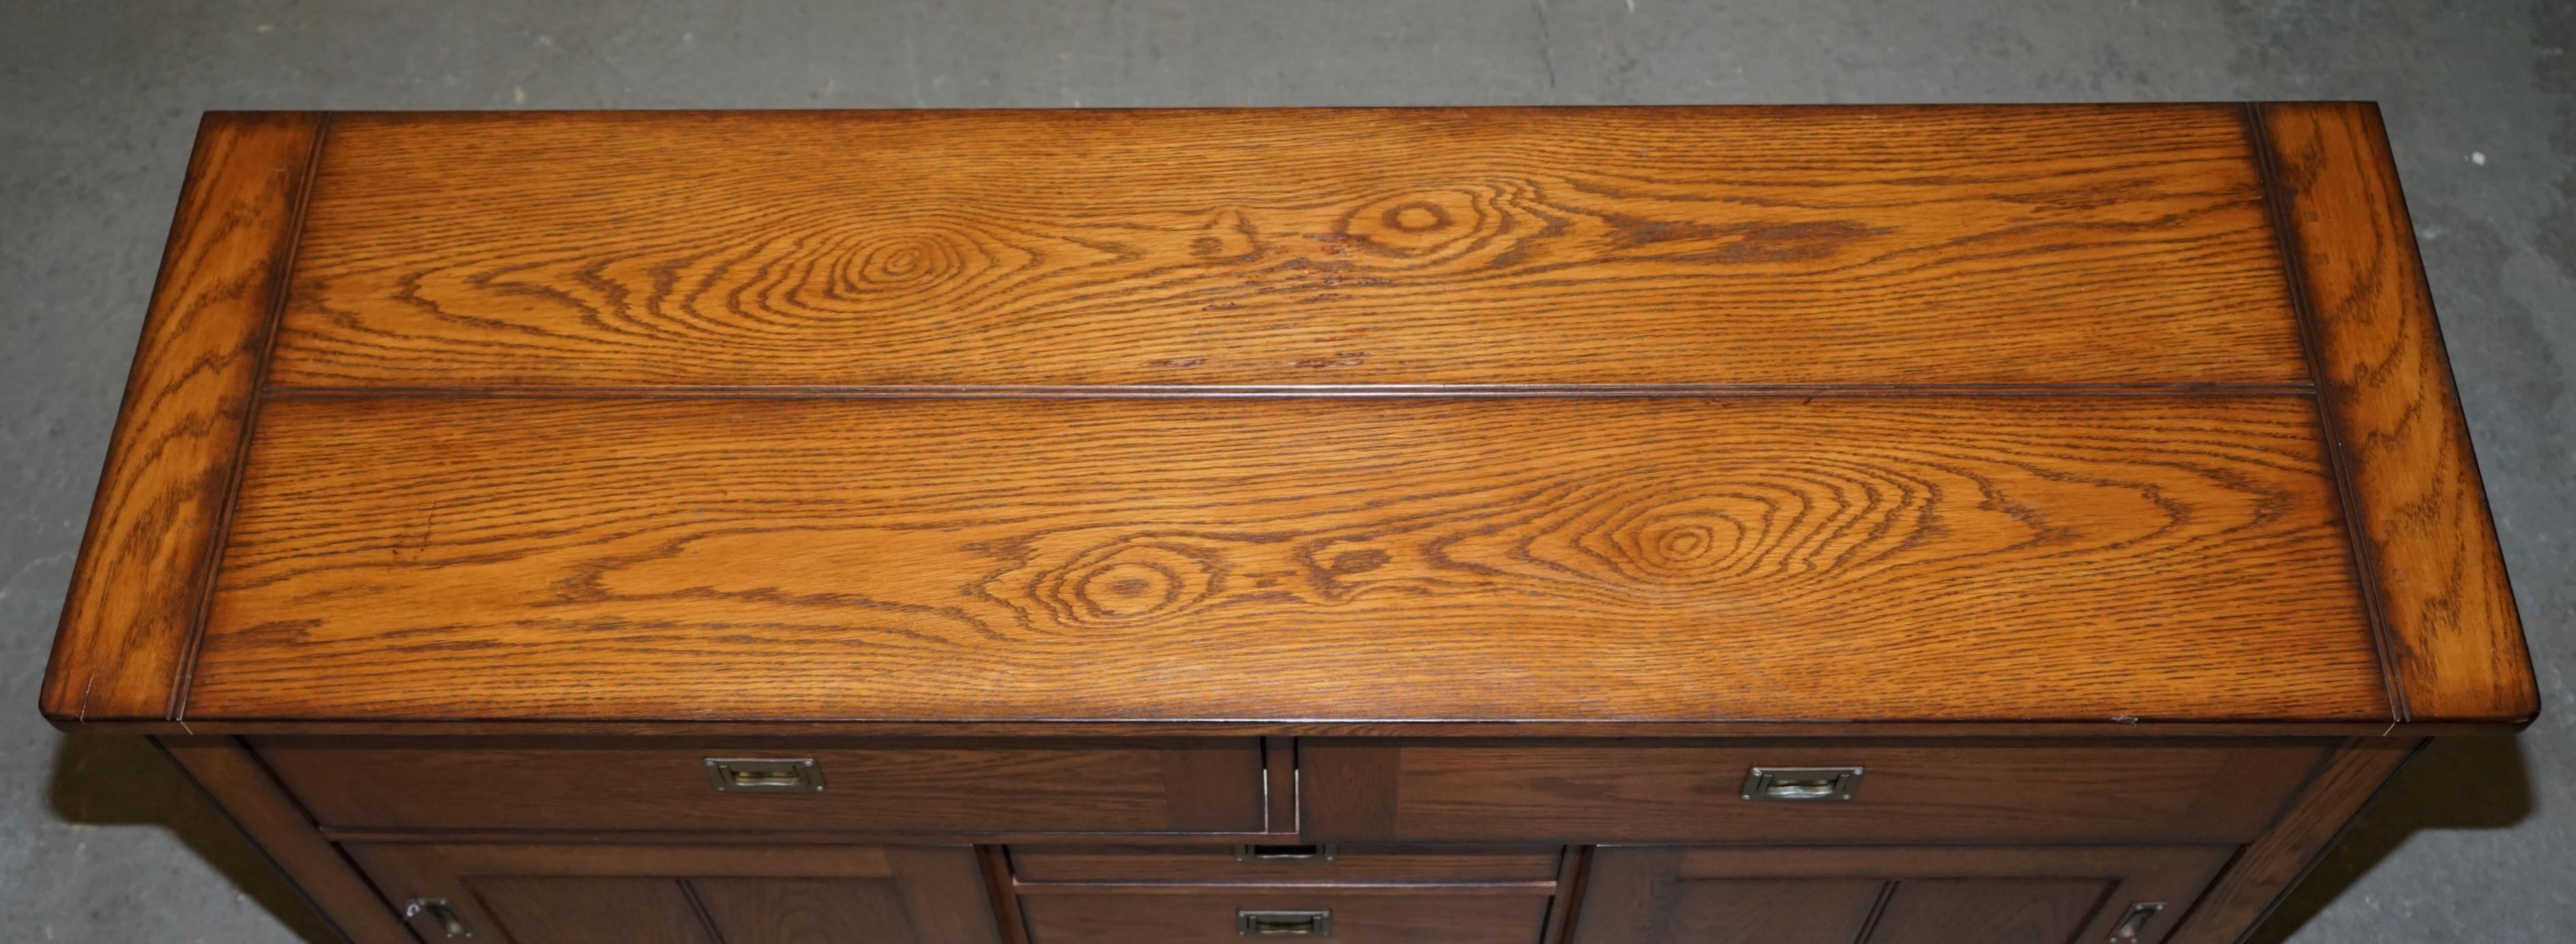 Hand-Crafted Stunning Solid Oak Vintage Campaign Style Sideboard with Drawers and Cupboards